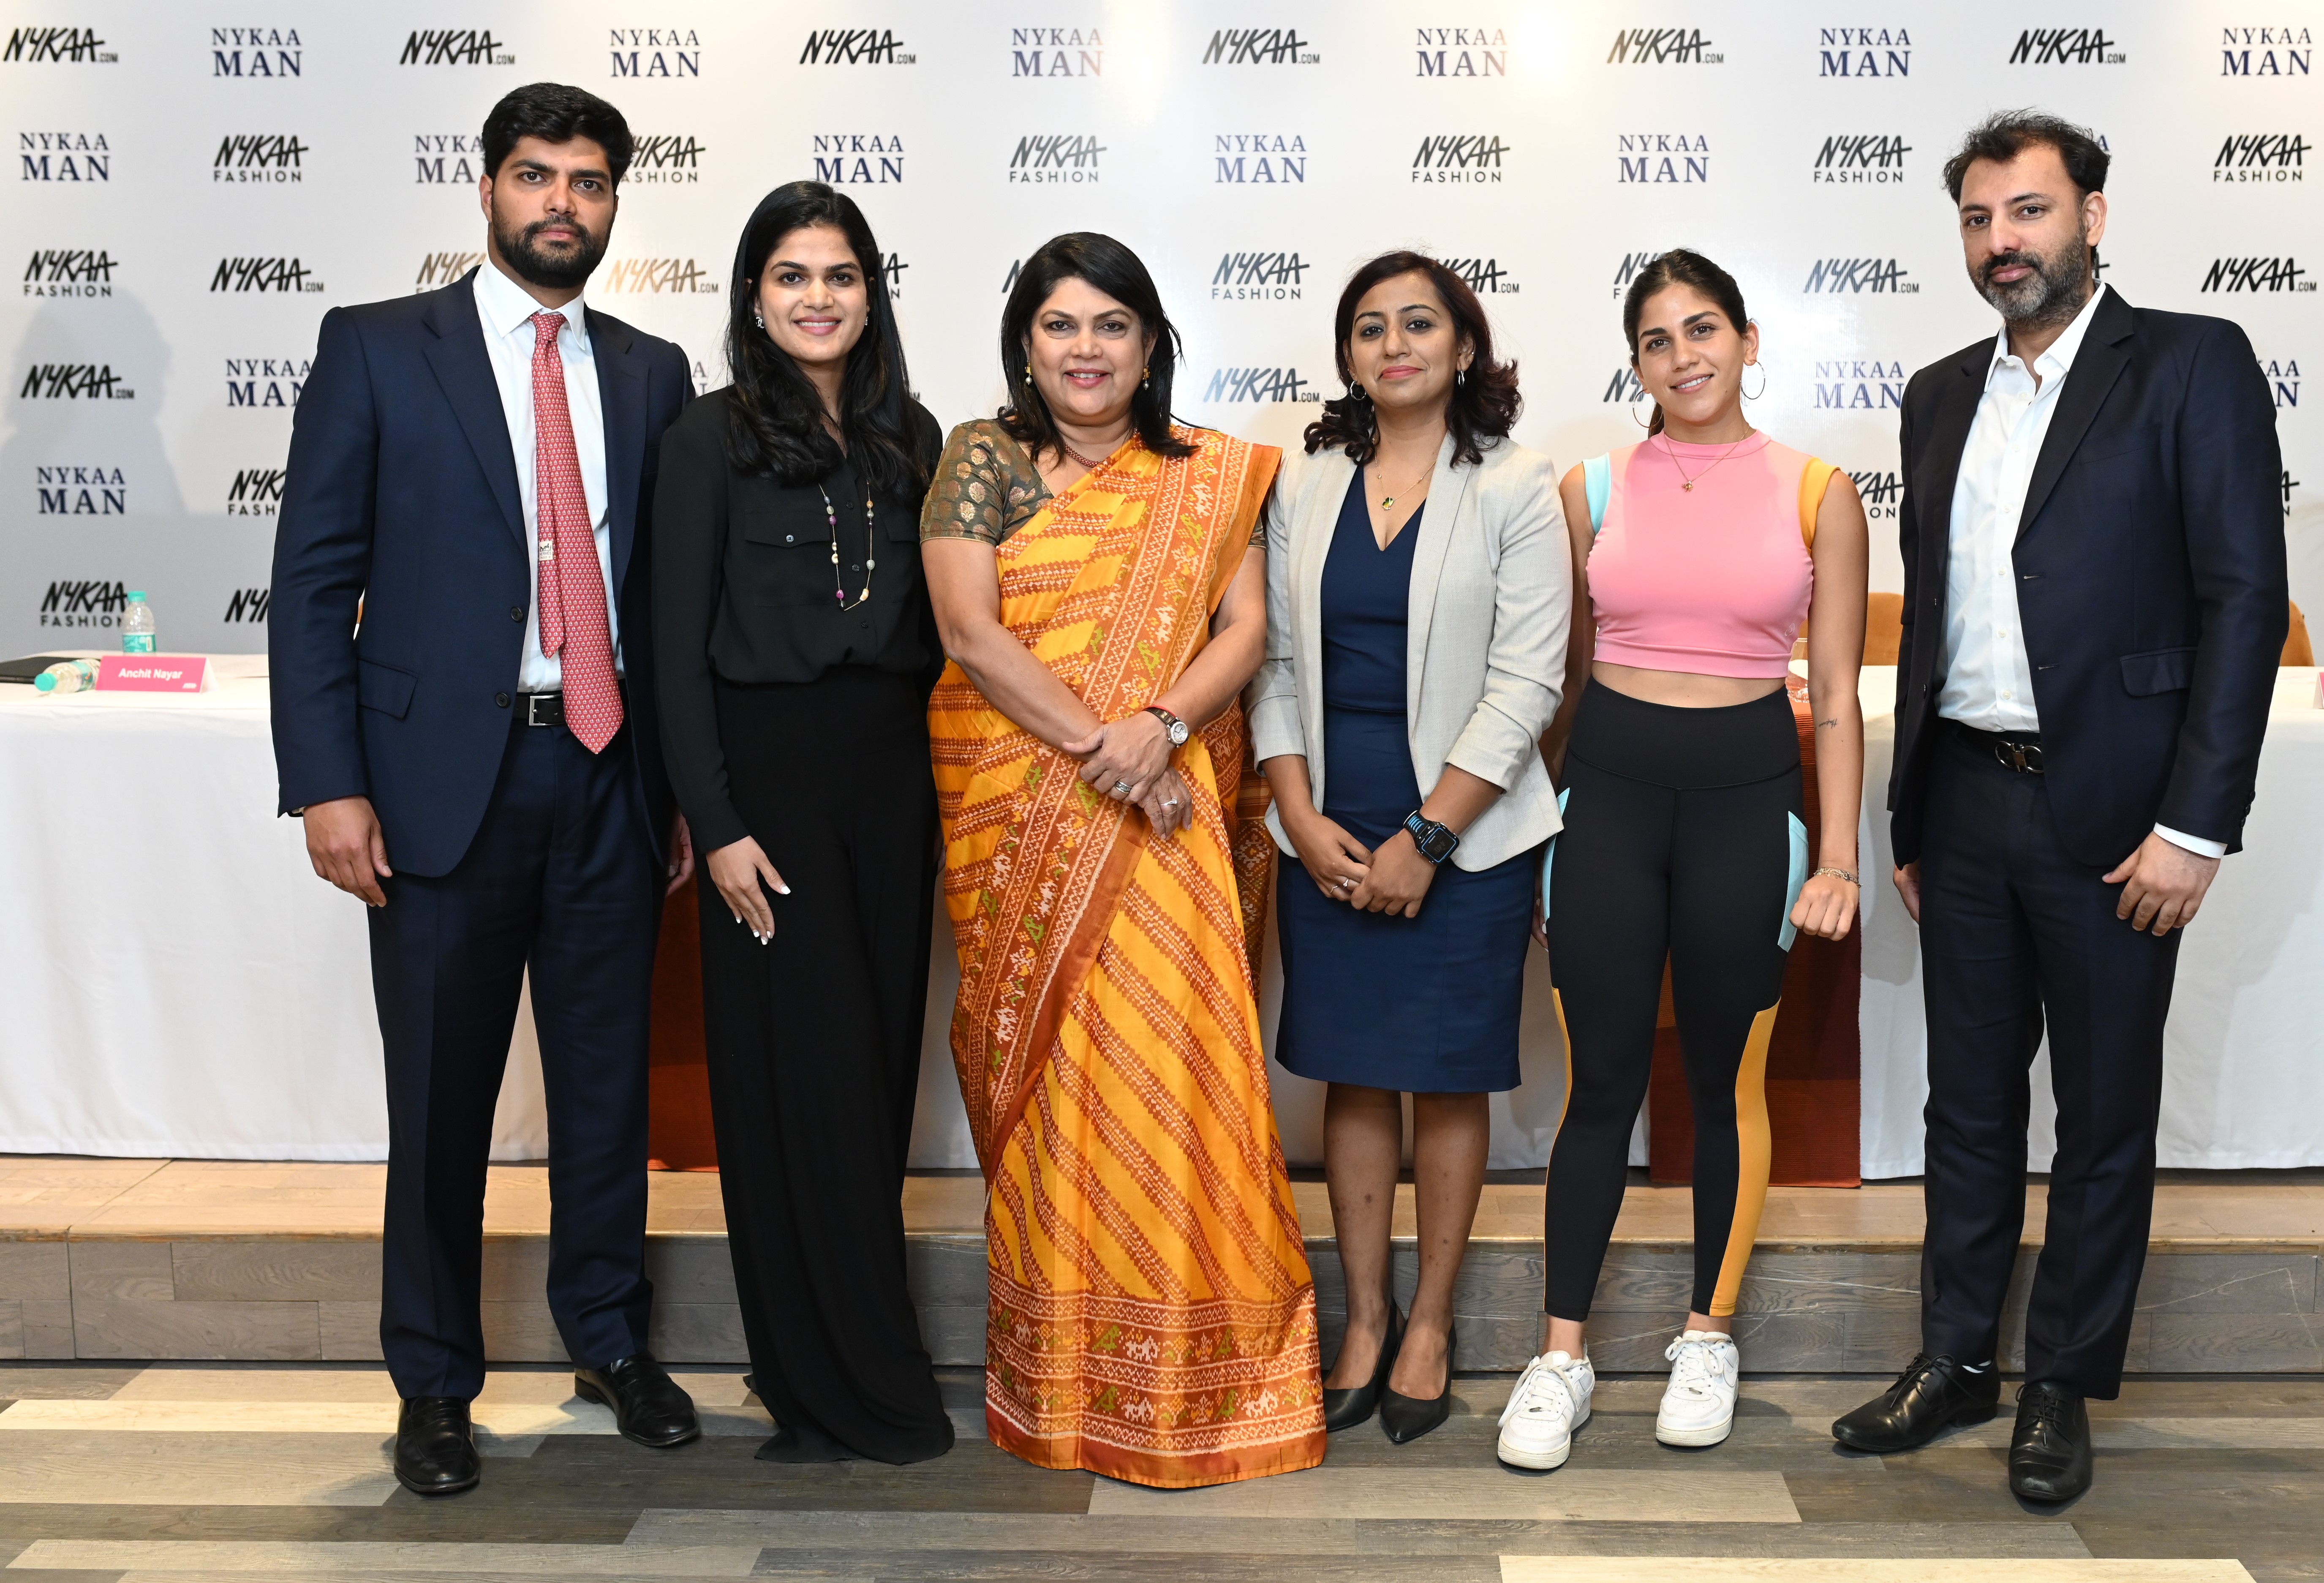 nykaa-fashion-expands-its-activewear-portfolio-by-acquiring-kica